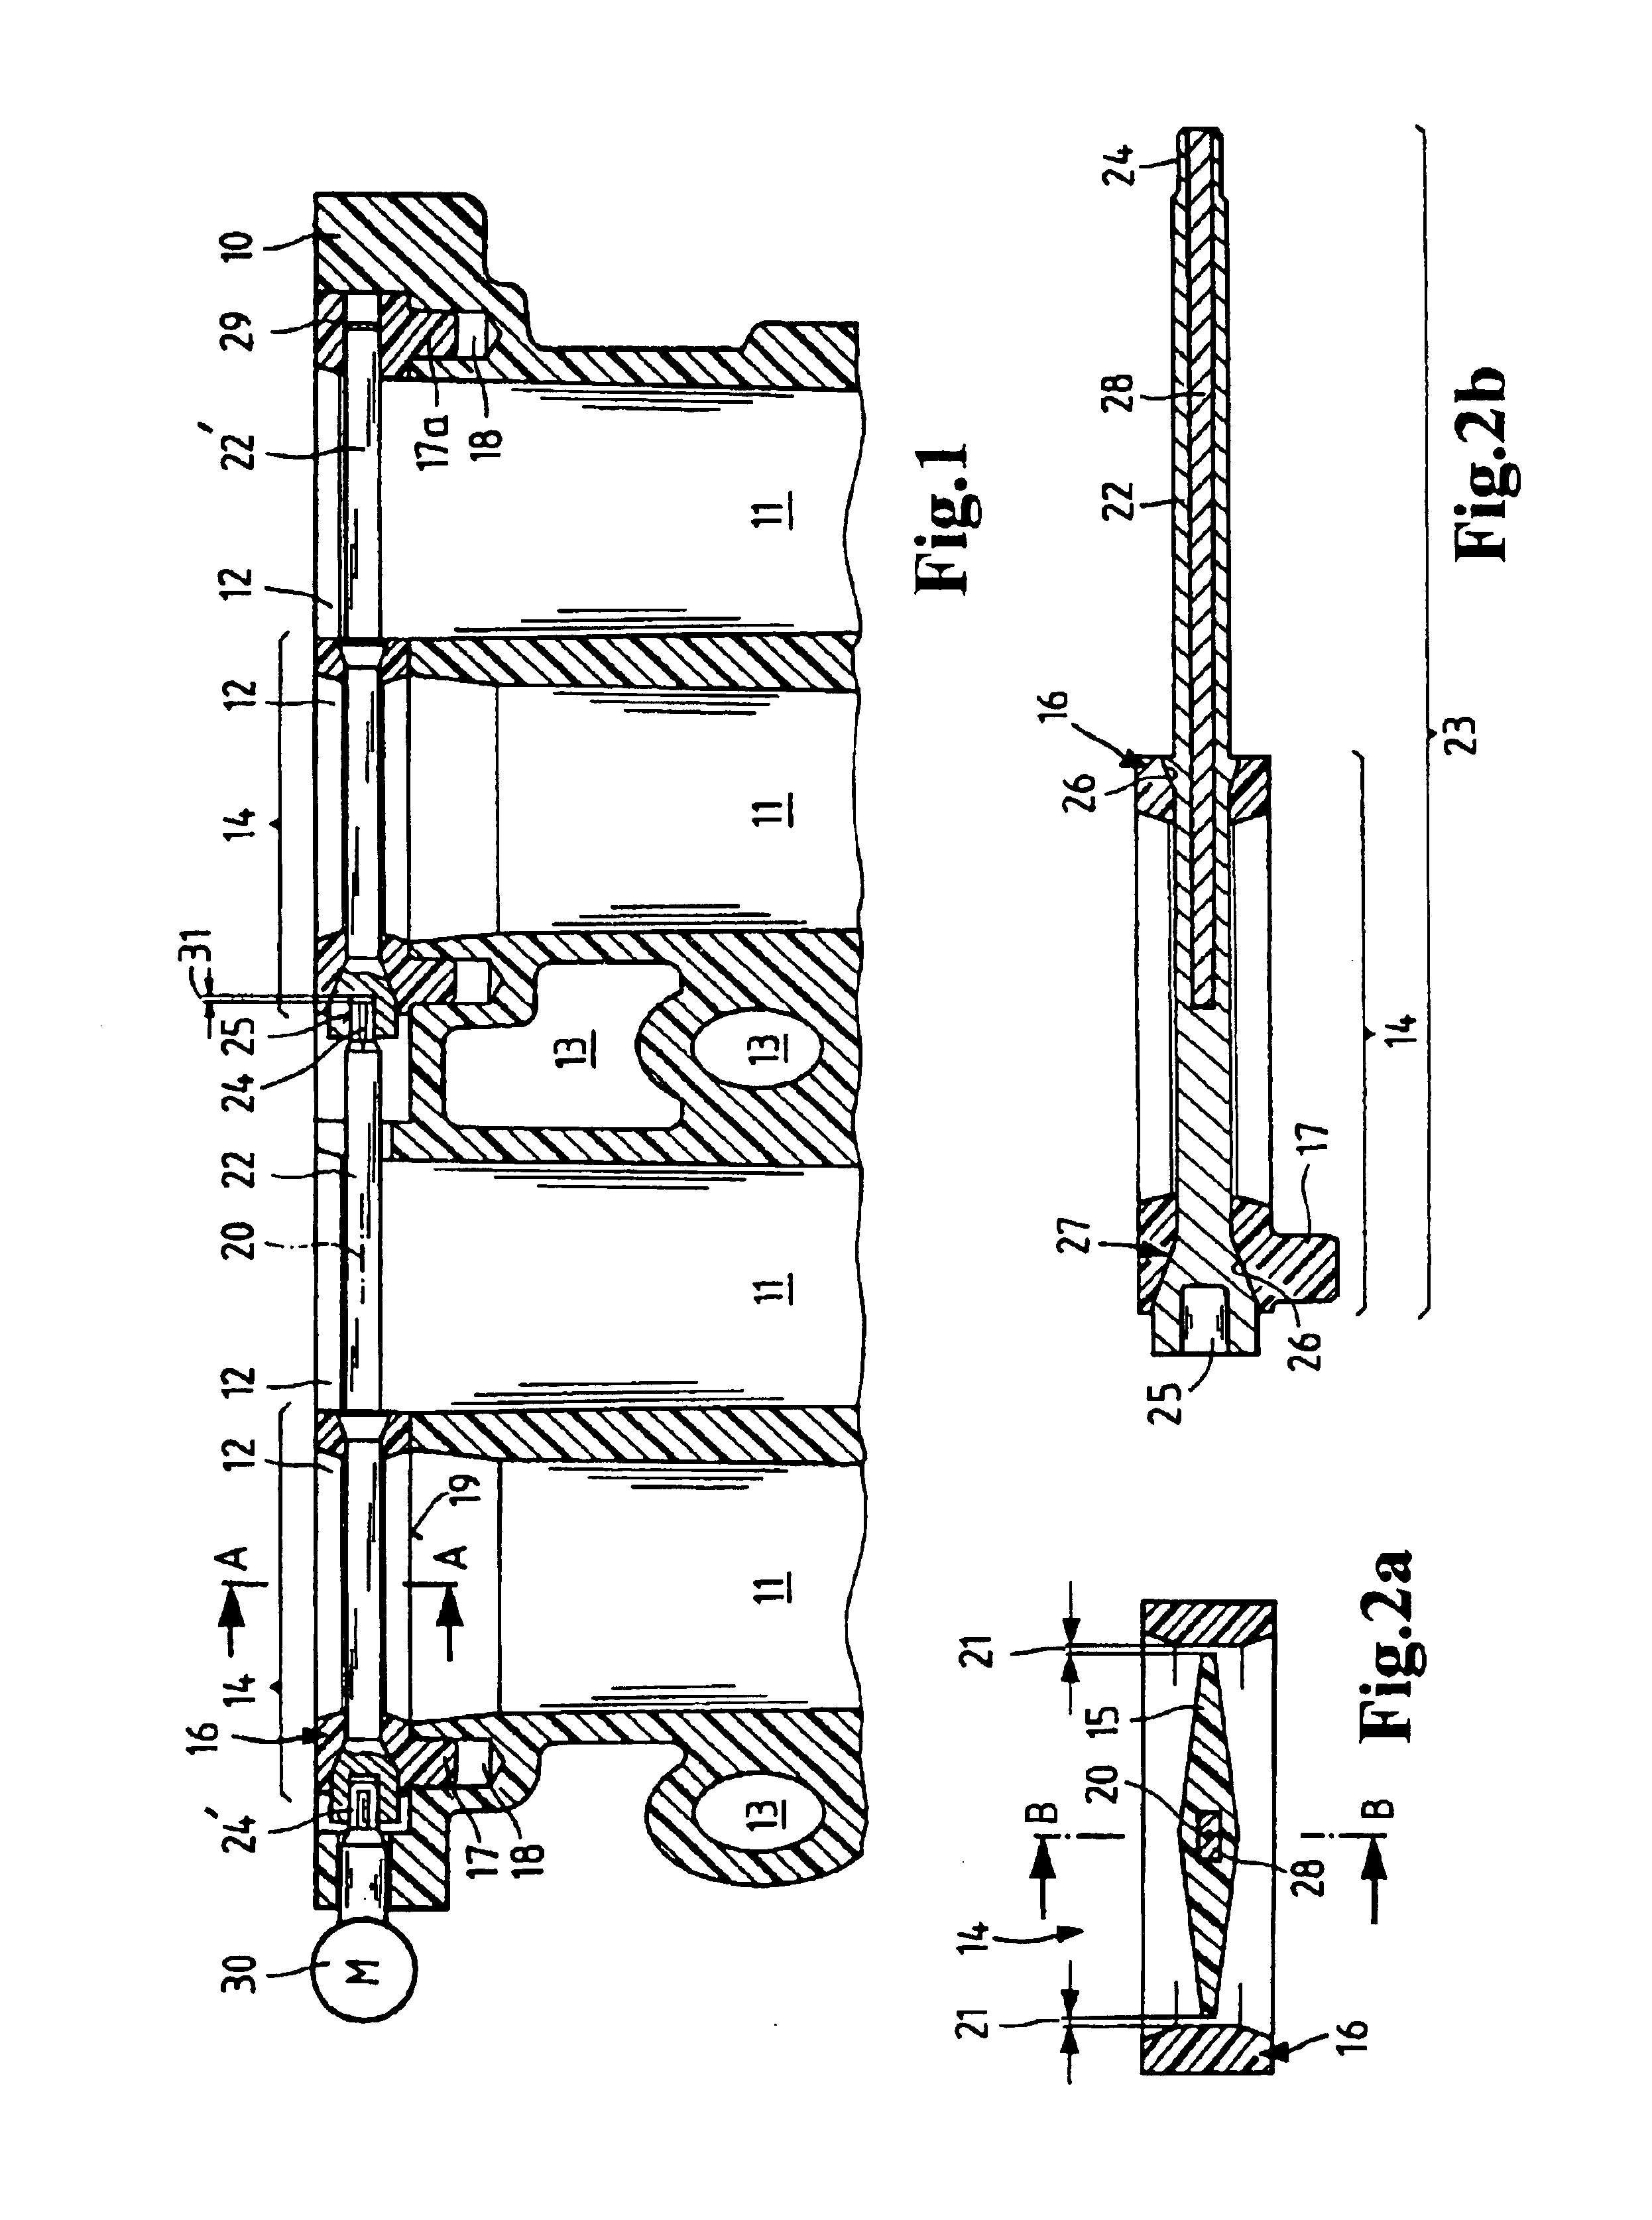 Control valve assembly of valve assembly-injection-molded control valves or modules